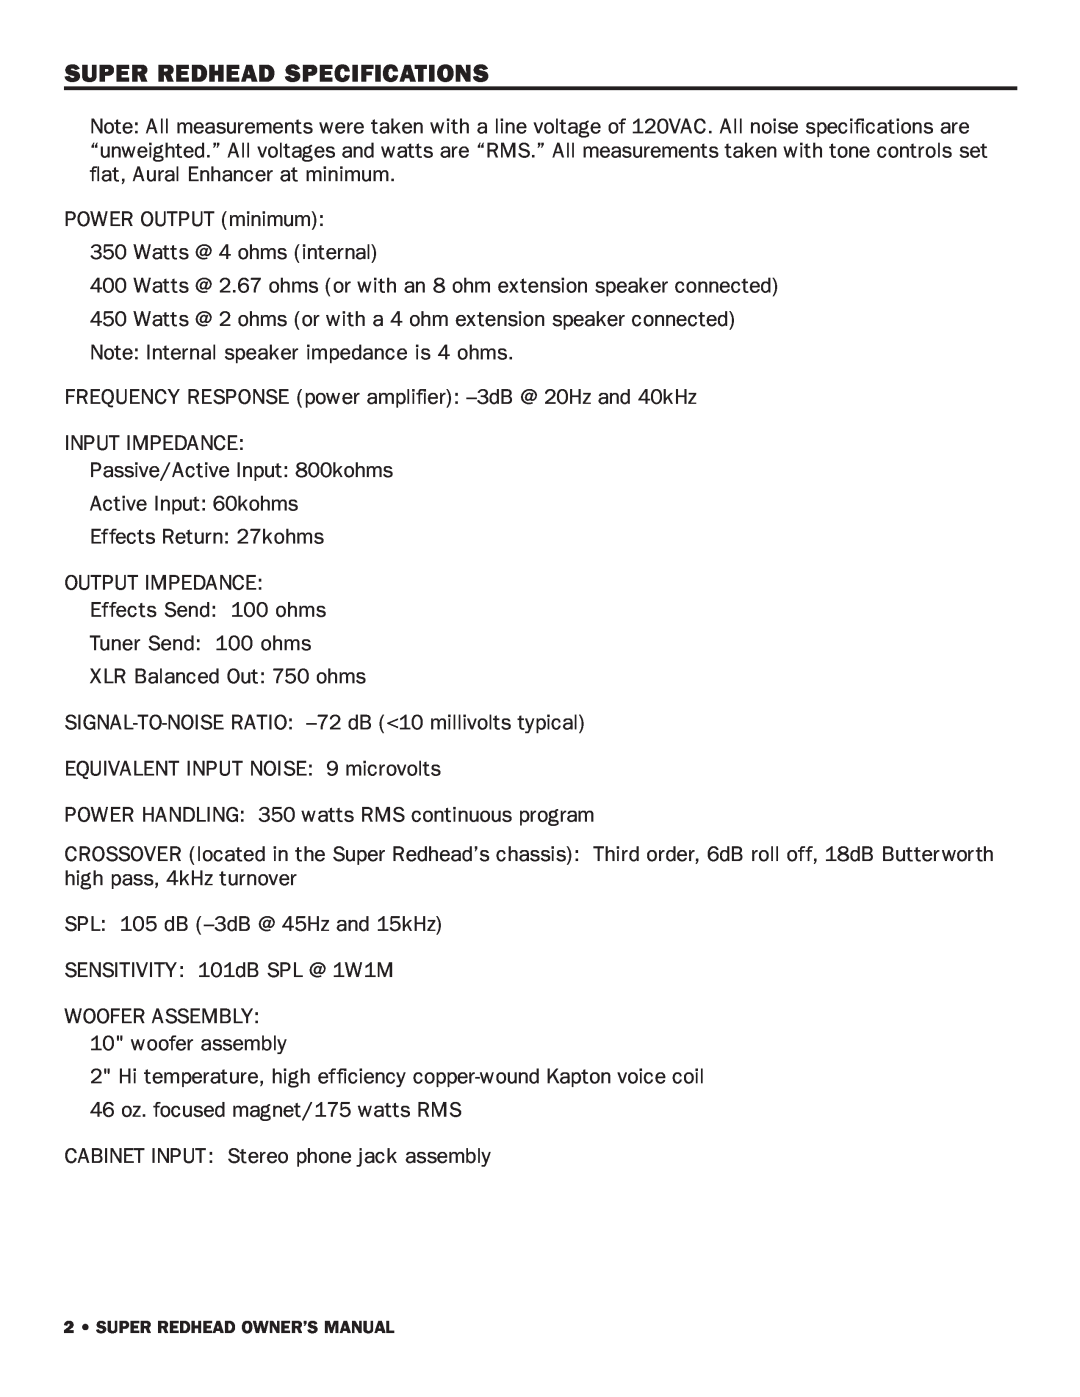 SWR Sound owner manual Super Redhead Specifications 